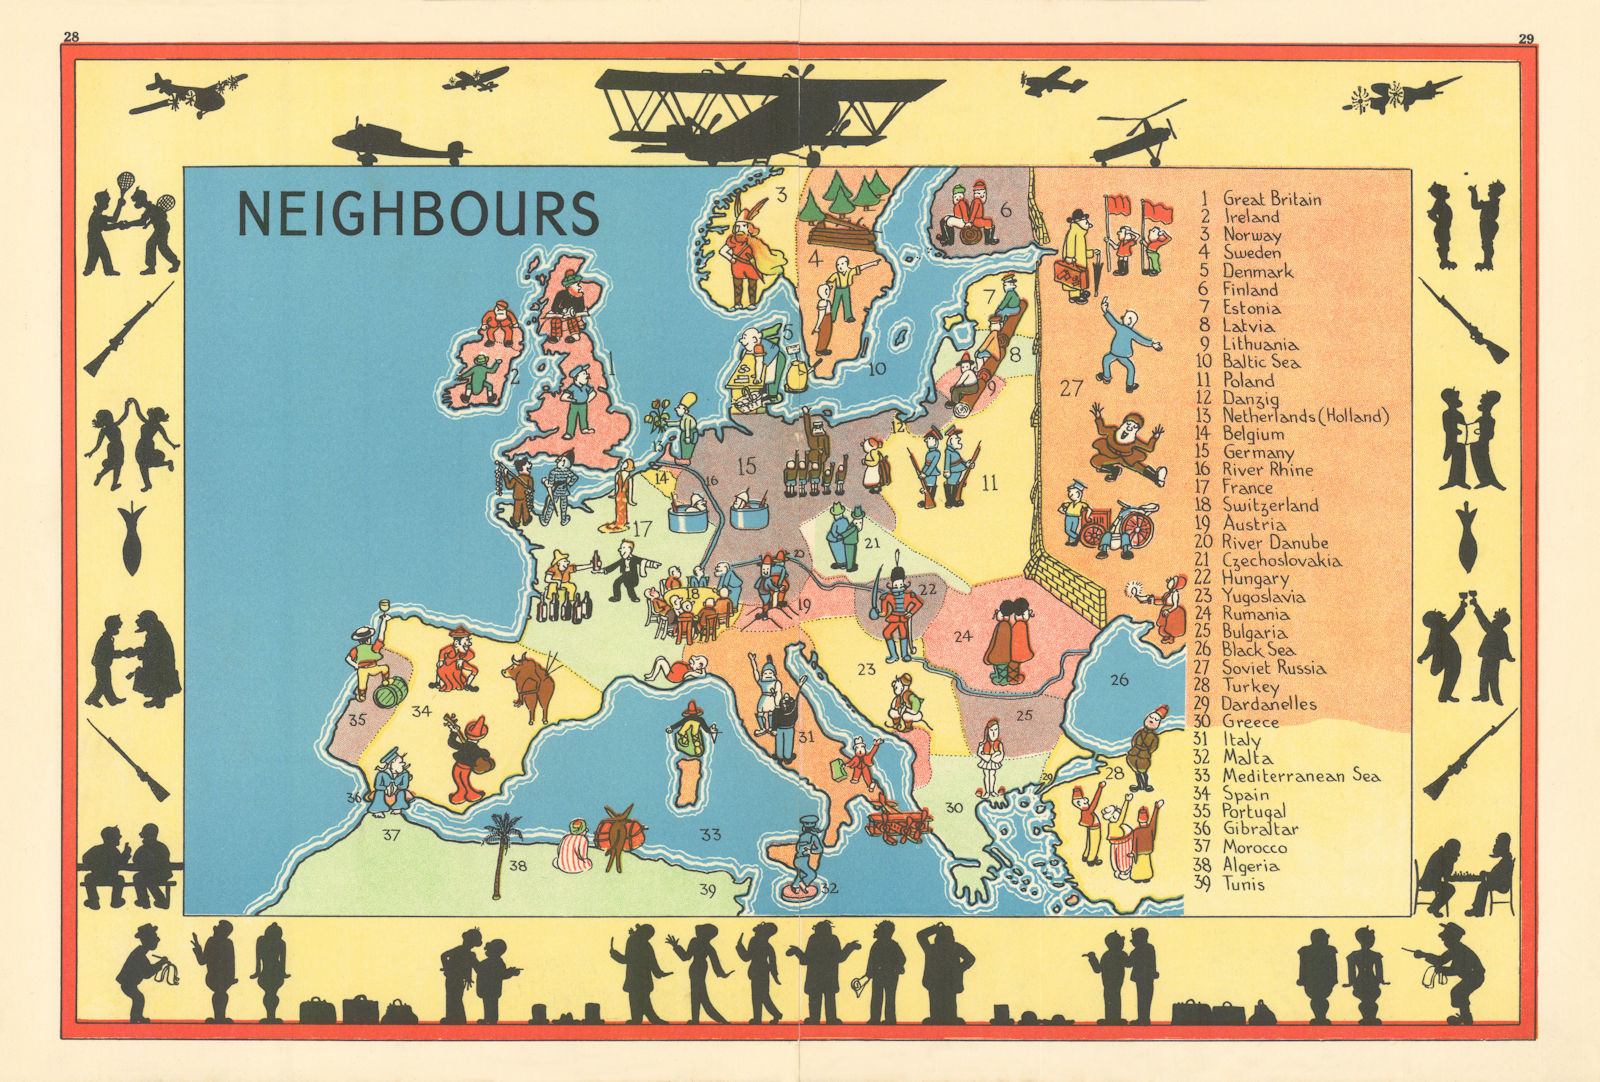 "Neighbours" Pre WW2 Europe allegorical political pictorial map. ALNWICK 1937